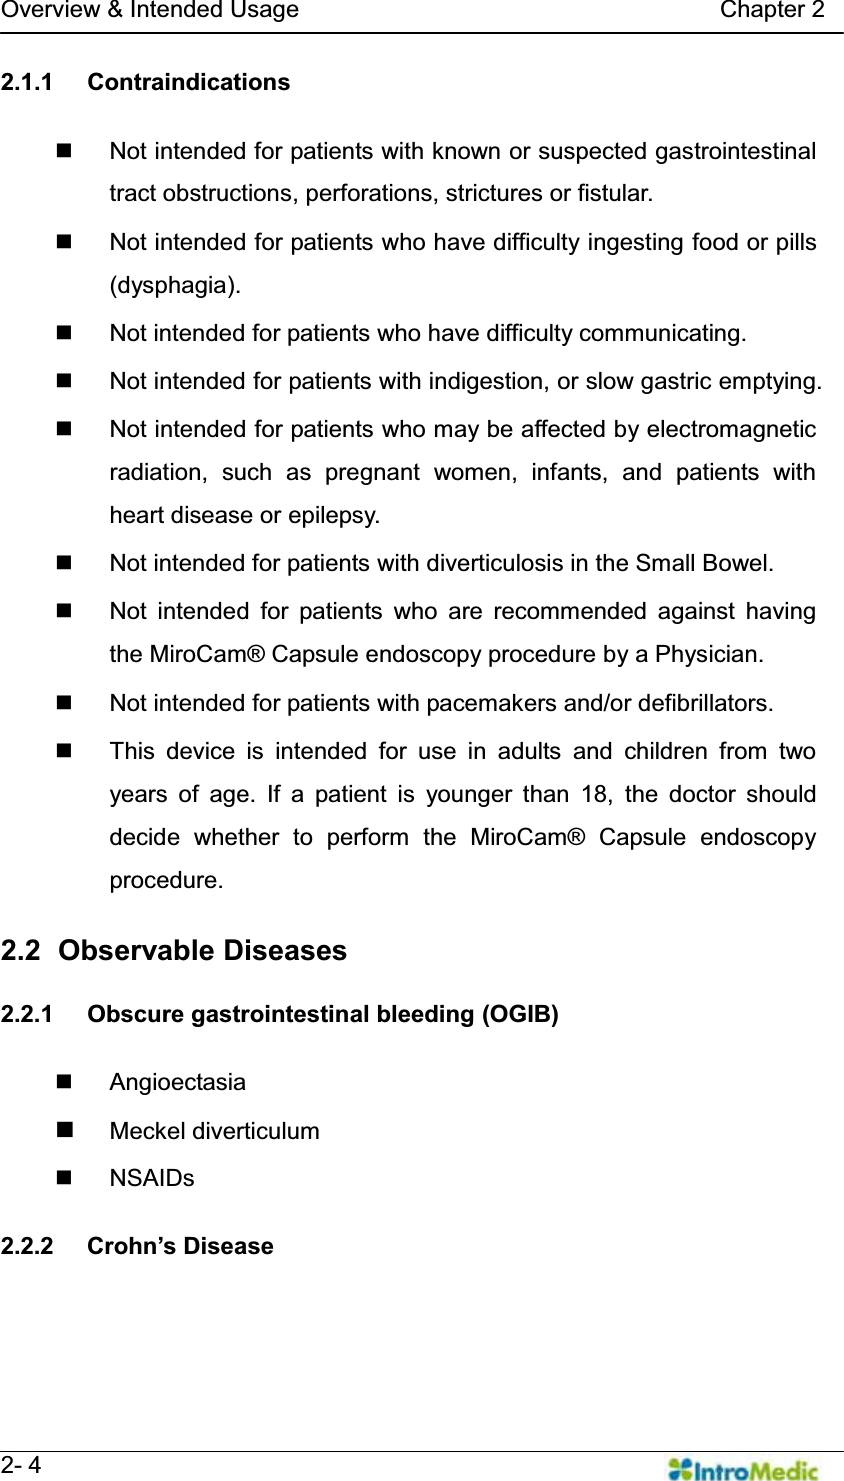   Overview &amp; Intended Usage                                   Chapter 2   2- 4 2.1.1 Contraindications    Not intended for patients with known or suspected gastrointestinal tract obstructions, perforations, strictures or fistular.   Not intended for patients who have difficulty ingesting food or pills (dysphagia).   Not intended for patients who have difficulty communicating.   Not intended for patients with indigestion, or slow gastric emptying.    Not intended for patients who may be affected by electromagnetic radiation, such as pregnant women, infants, and patients with heart disease or epilepsy.   Not intended for patients with diverticulosis in the Small Bowel.   Not intended for patients who are recommended against having the MiroCam® Capsule endoscopy procedure by a Physician.   Not intended for patients with pacemakers and/or defibrillators.   This device is intended for use in adults and children from two years of age. If a patient is younger than 18, the doctor should decide whether to perform the MiroCam® Capsule endoscopy procedure.  2.2   Observable  Diseases  2.2.1 Obscure gastrointestinal bleeding (OGIB)   Angioectasia  Meckel diverticulum  NSAIDs   2.2.2  &amp;URKQ¶V&apos;LVHDVH  